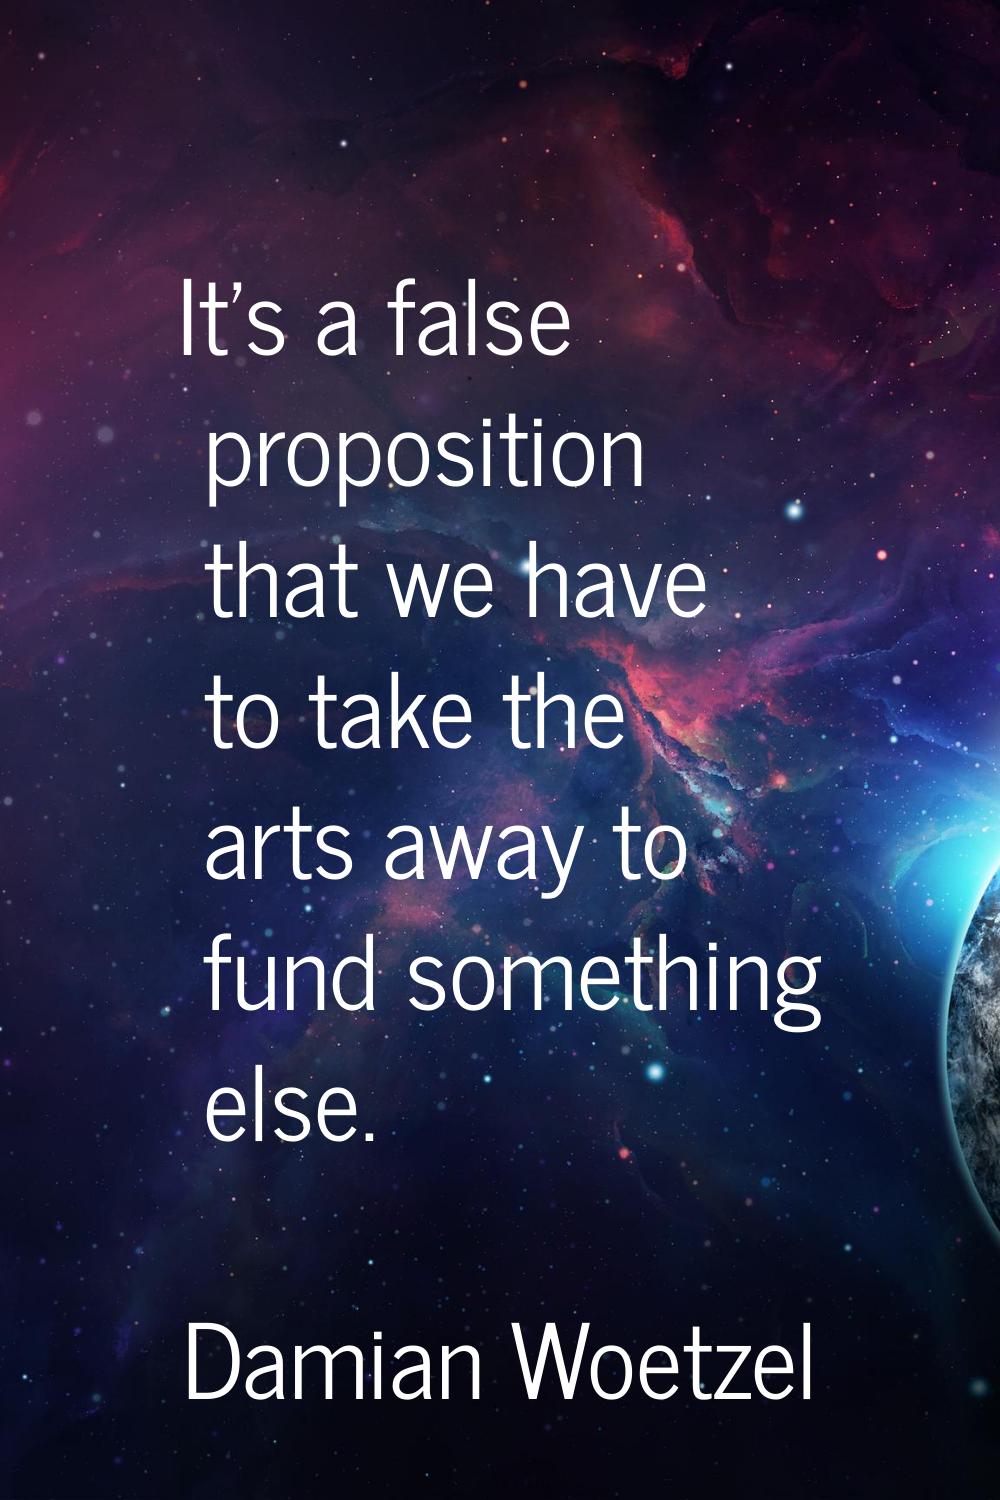 It's a false proposition that we have to take the arts away to fund something else.